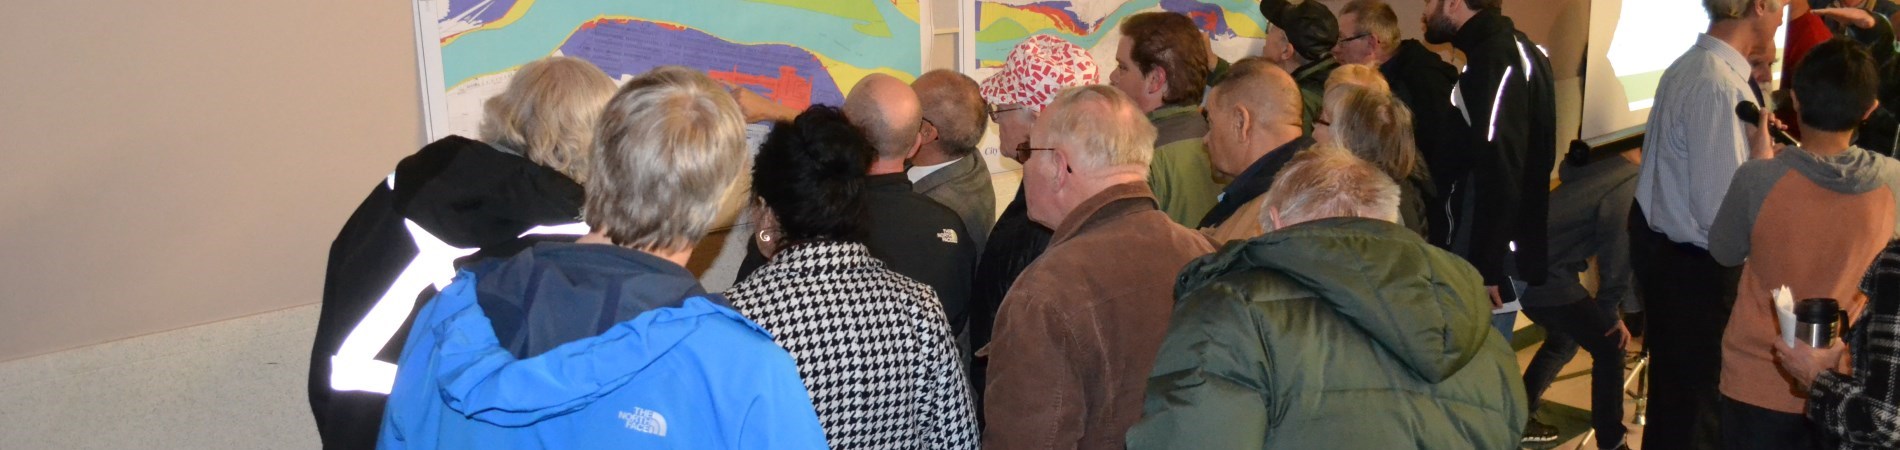 members of the public gather to view display